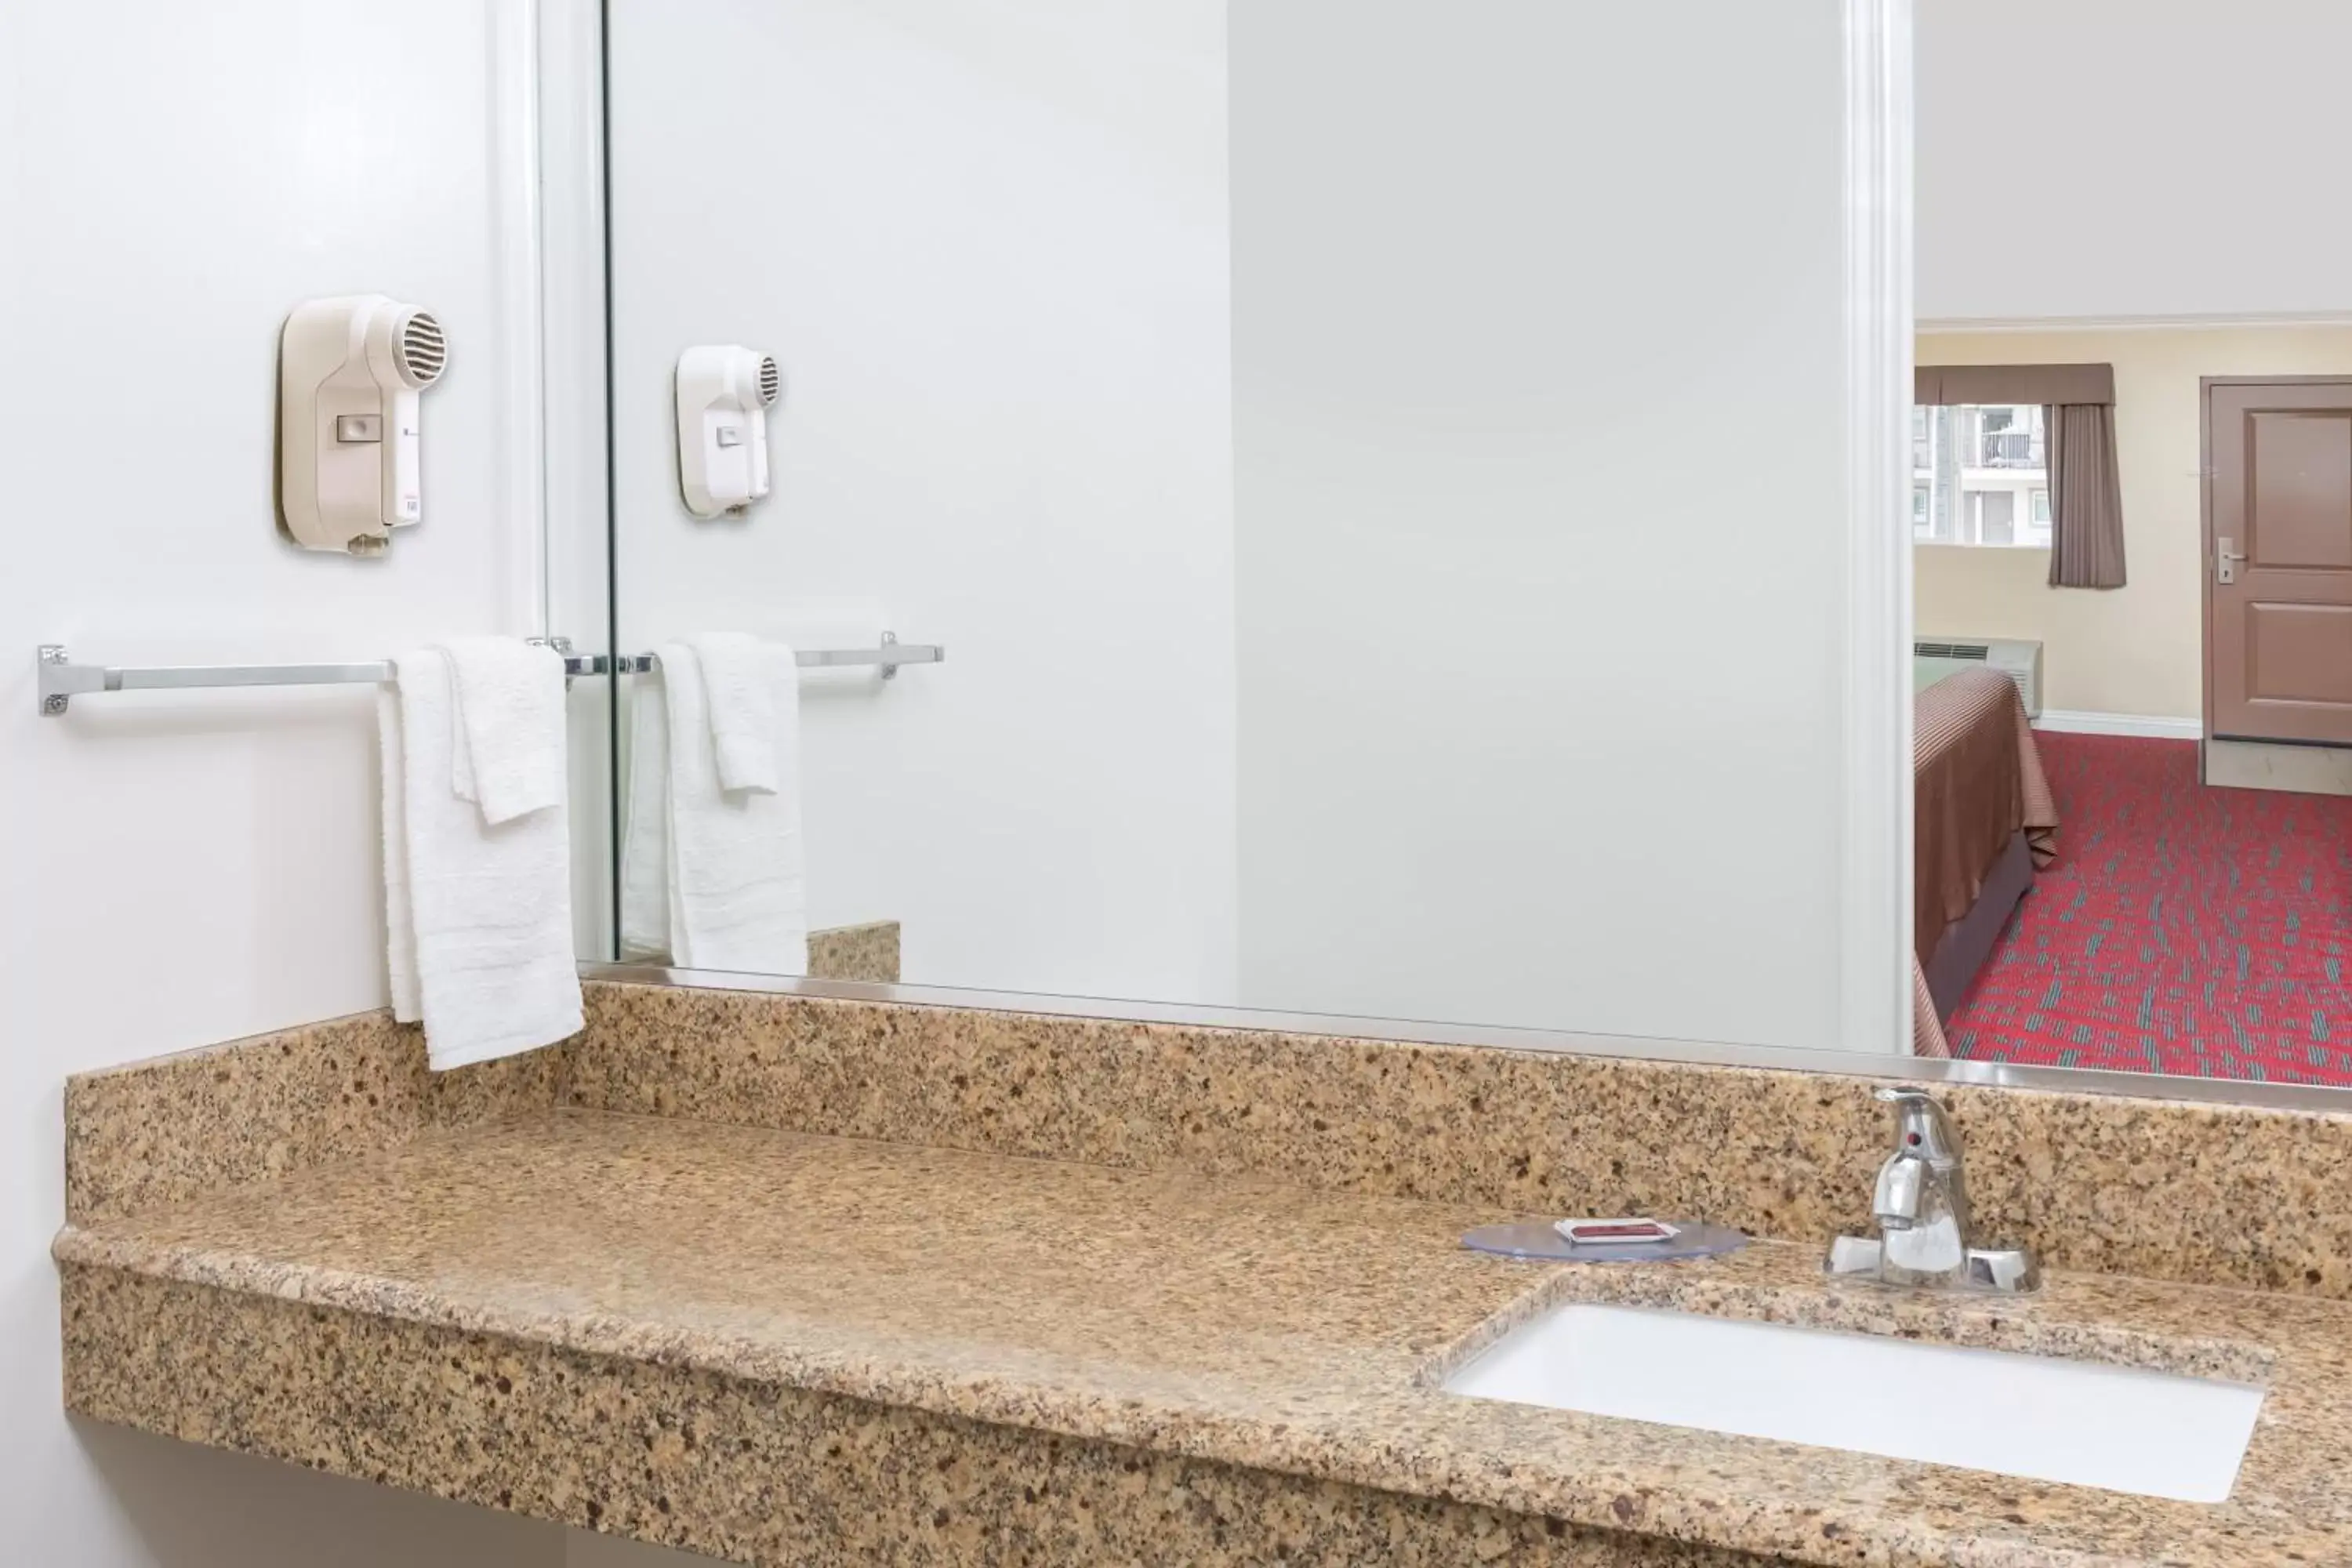 Area and facilities, Bathroom in Travelodge Inn & Suites by Wyndham Bell Los Angeles Area